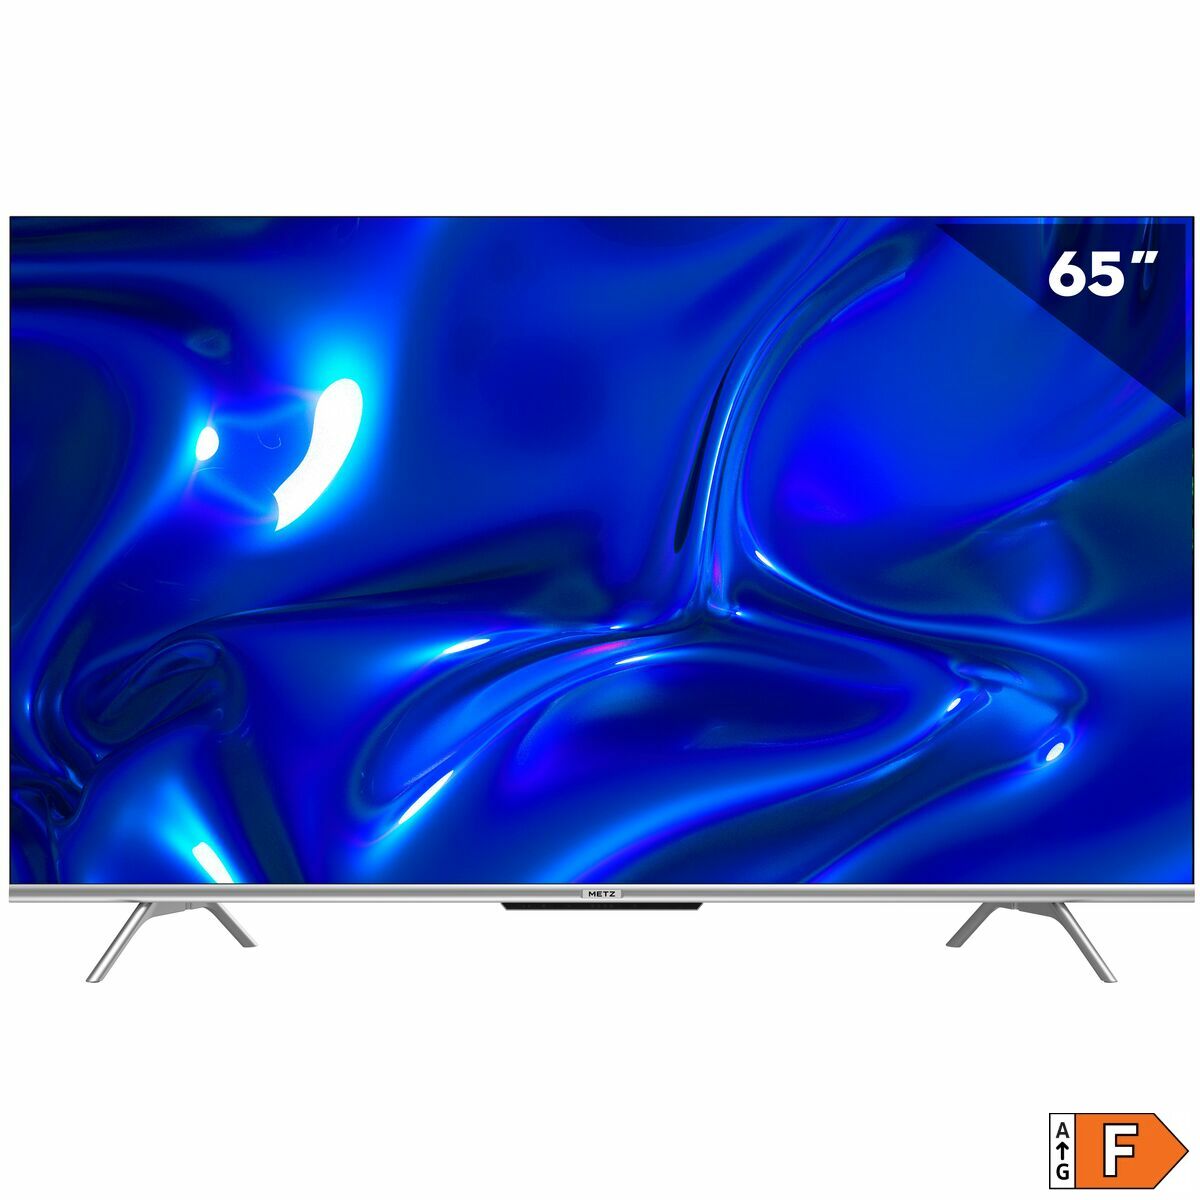 Smart TV Metz 65MUD7000Z 65" LED 4K Ultra HD, Metz, Electronics, TV, Video and home cinema, smart-tv-metz-65mud7000z-65-led-4k-ultra-hd, Brand_Metz, category-reference-2609, category-reference-2625, category-reference-2931, category-reference-t-18805, category-reference-t-18827, category-reference-t-19653, cinema and television, Condition_NEW, entertainment, Price_500 - 600, UEFA Euro 2020, RiotNook